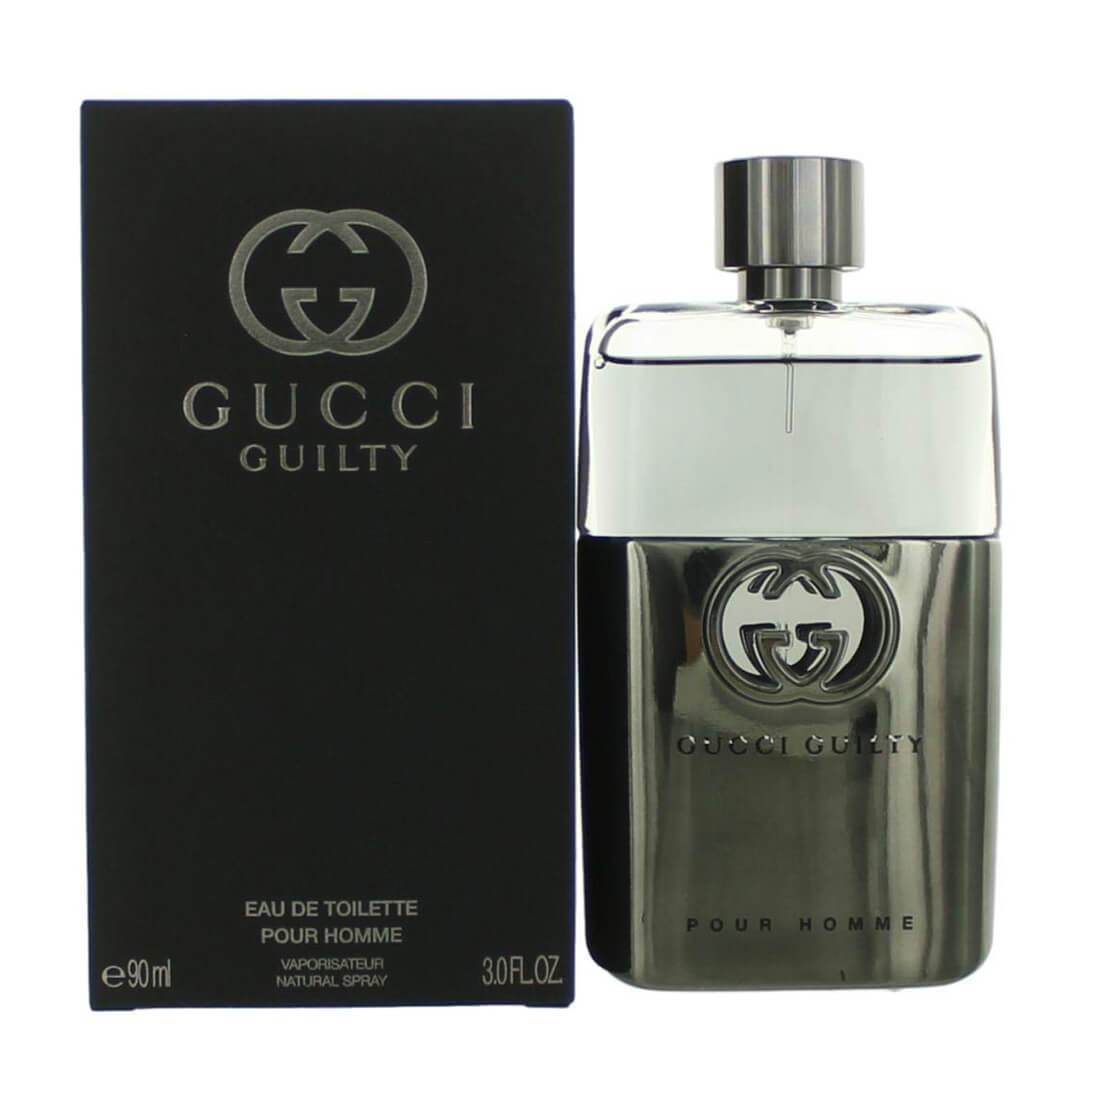 Gucci Bamboo Gucci perfume - a fragrance for women 2015